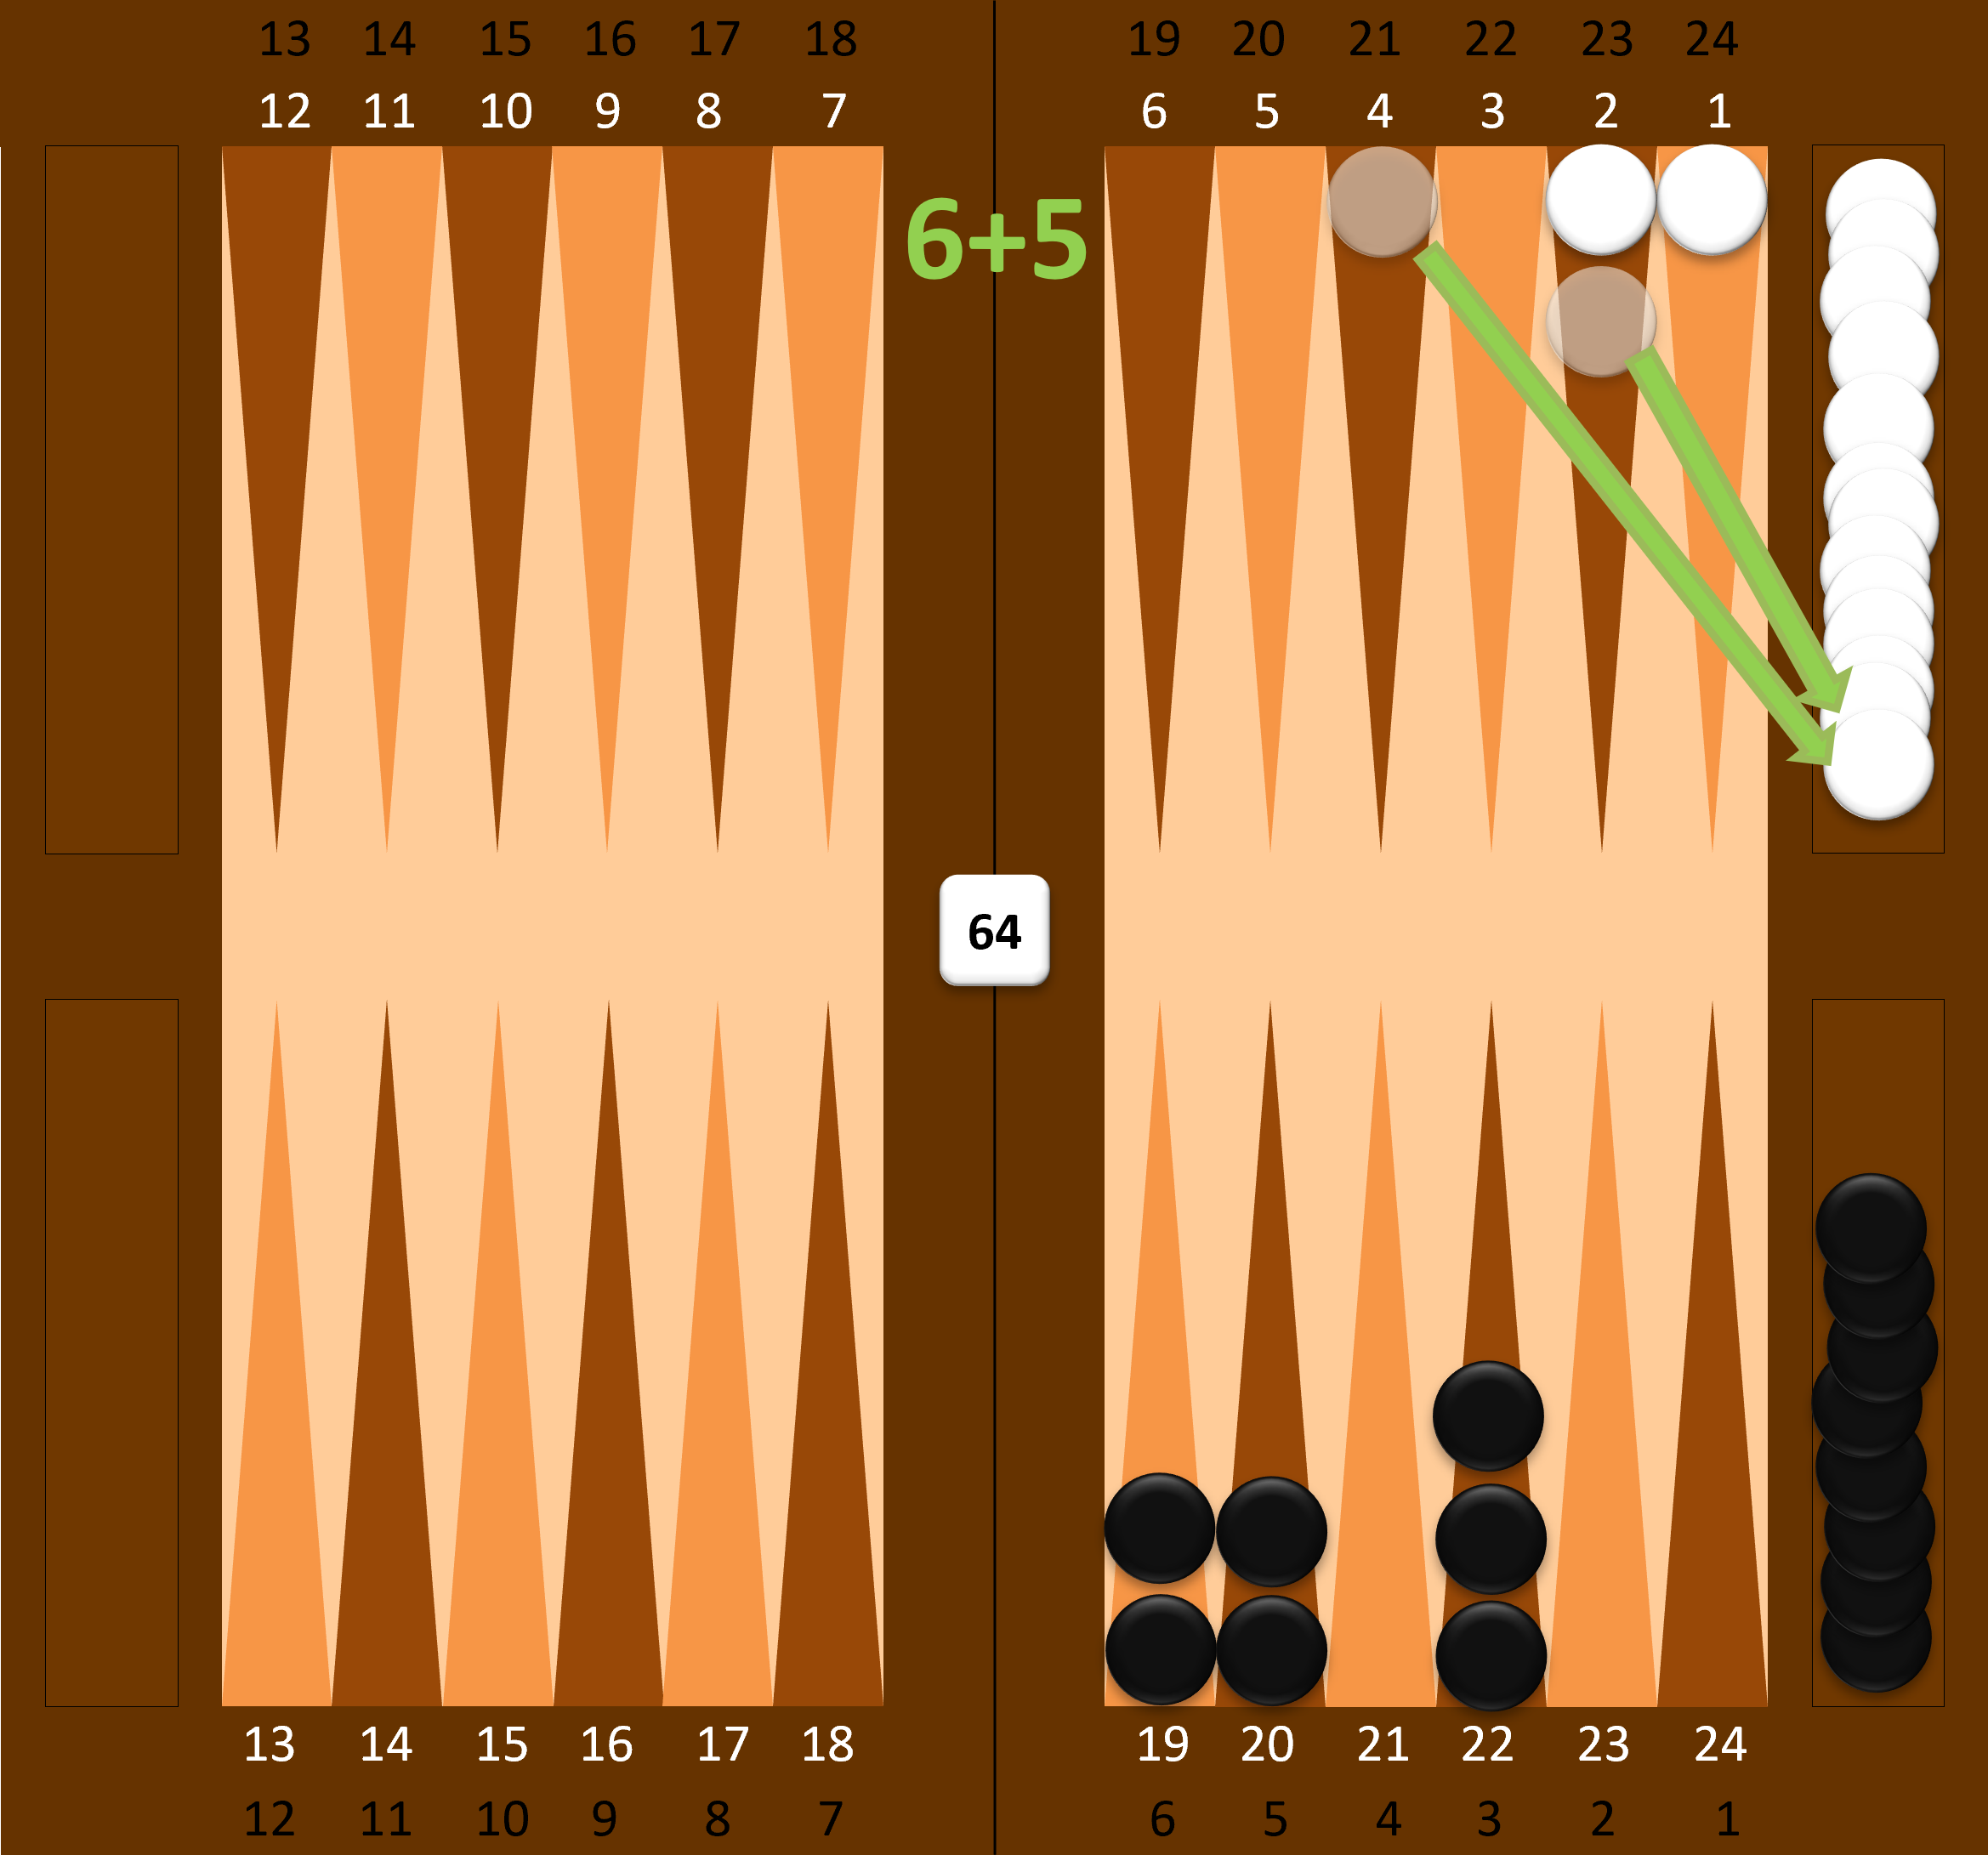 Example of bearing off pieces with higher dice rolls in Backgammon